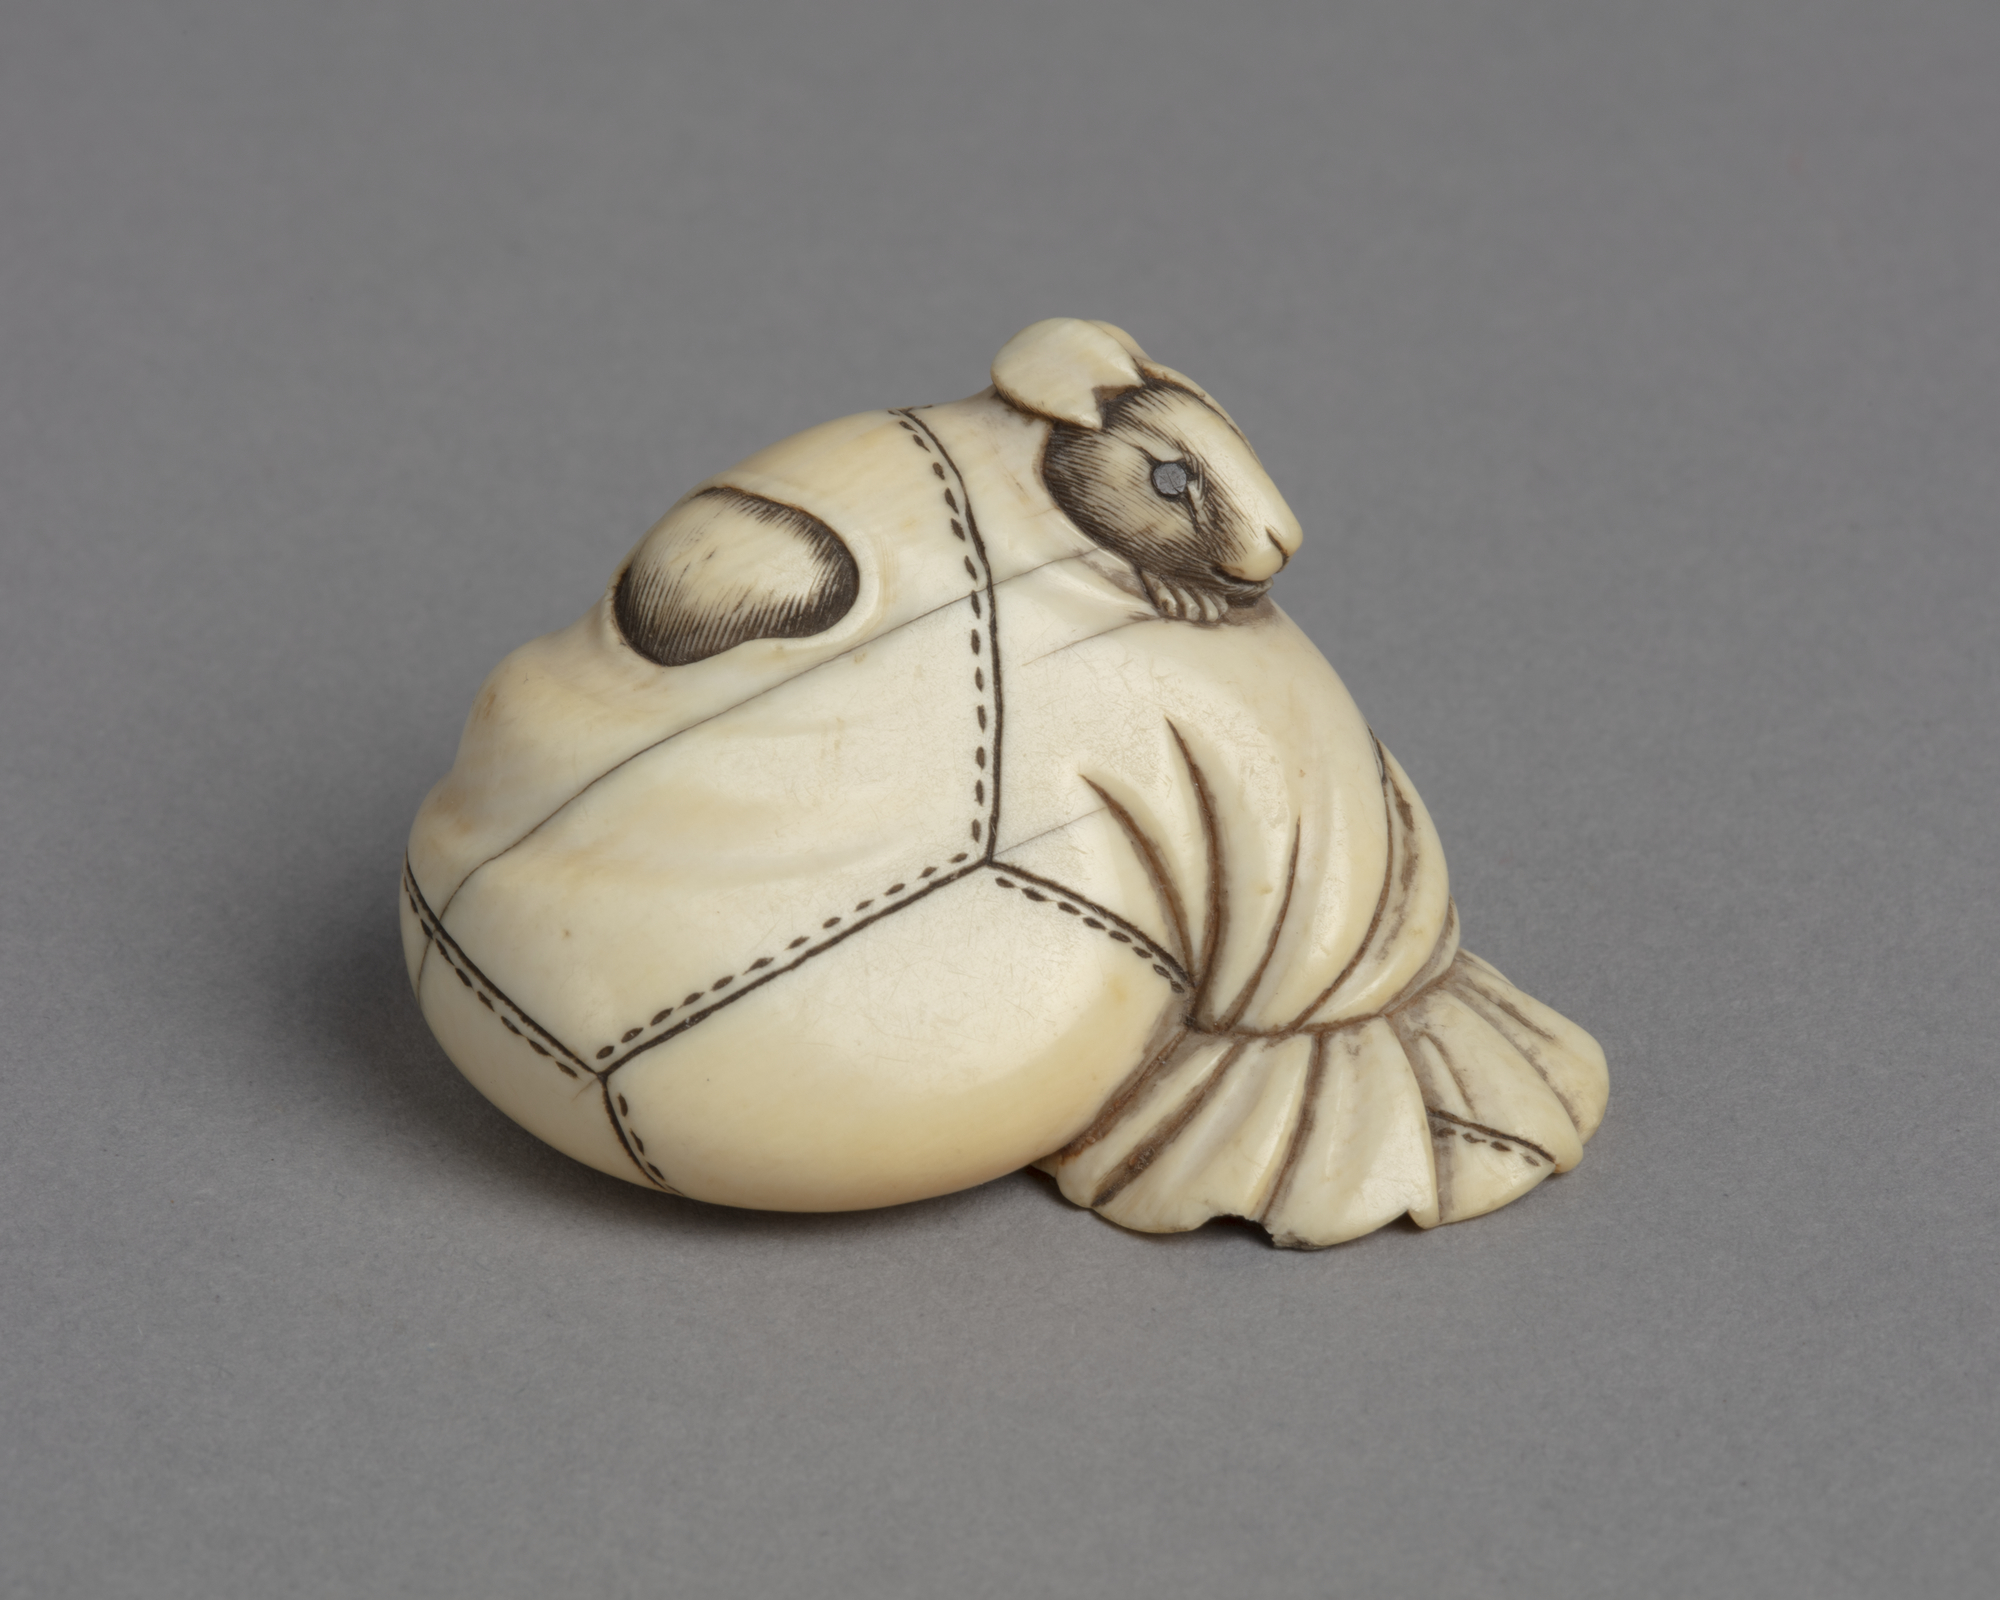 A Japanese ivory netsuke of a rat poking its head through a hole in a stitched rice-bag.